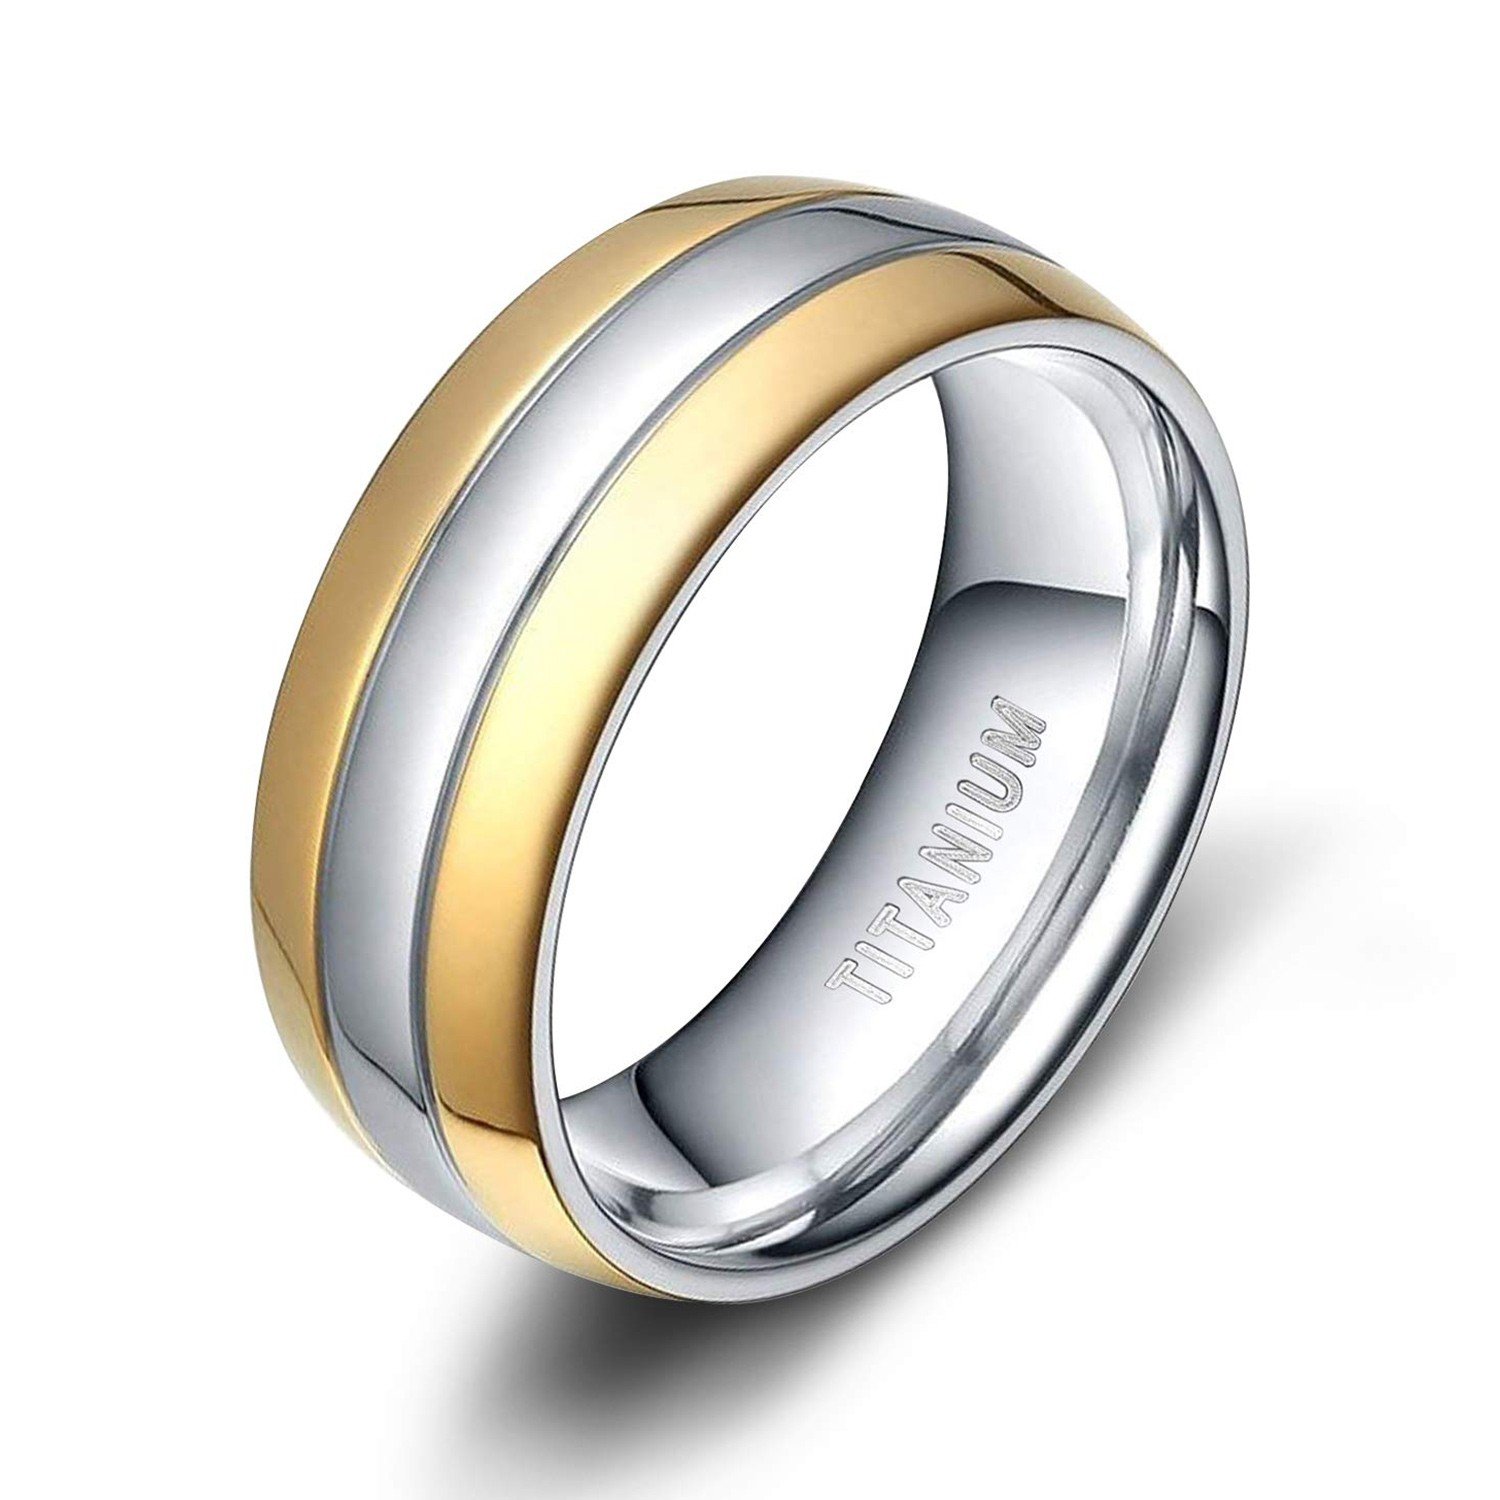 Mens Titanium Wedding Bands Gold and Silver Two Tone Rings